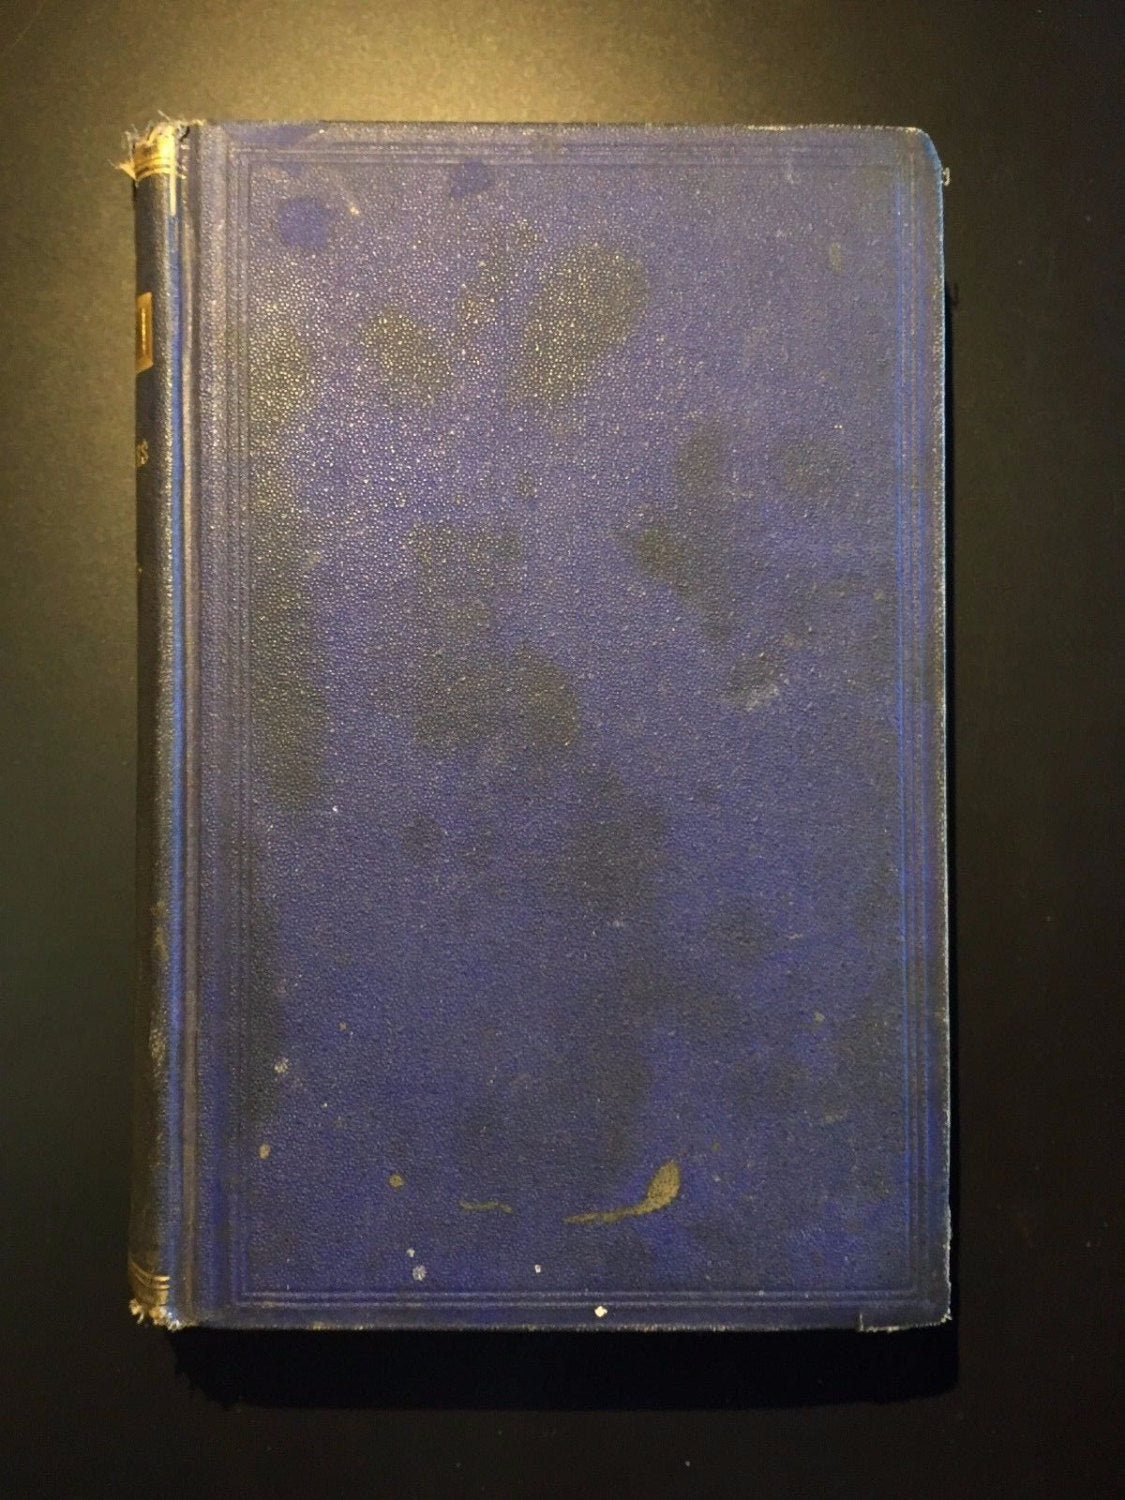 Puck, by Ouida (Maria Louise Ramé), 1st Ed., Uncommon, 1870